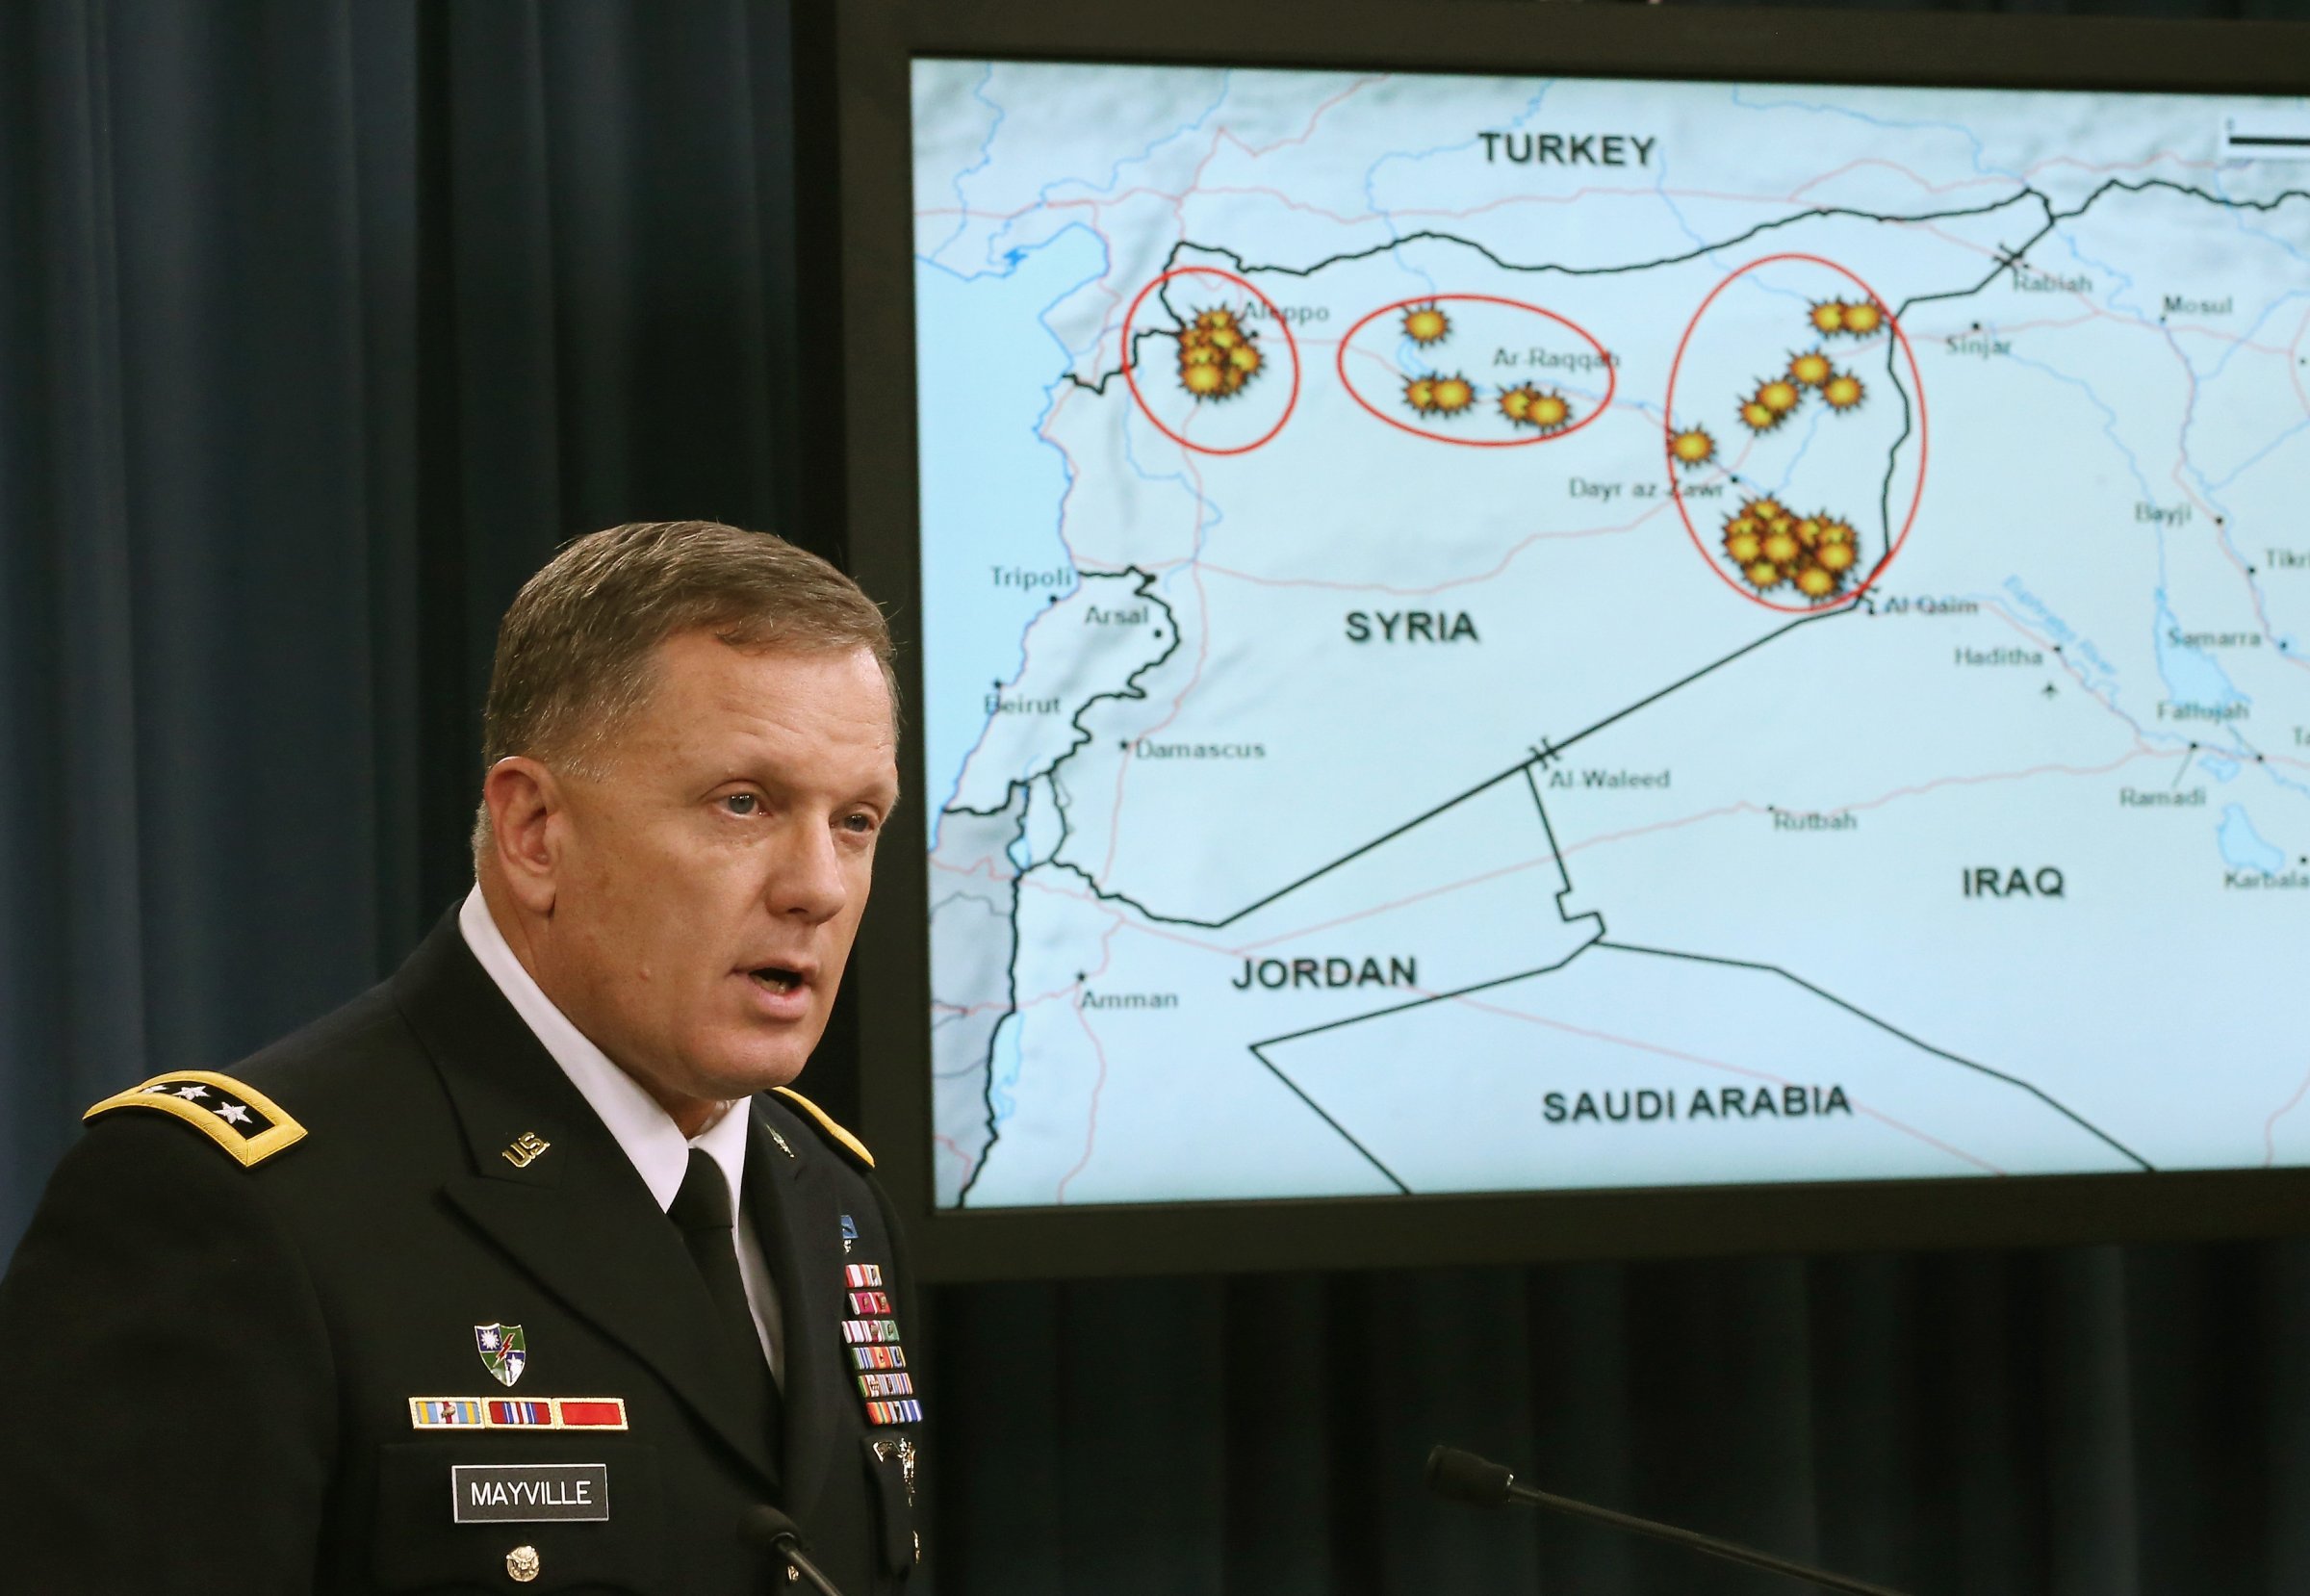 Lt. General William Mayville Jr. Briefs The Media At Pentagon On Recent Strikes Against ISIL In Syria